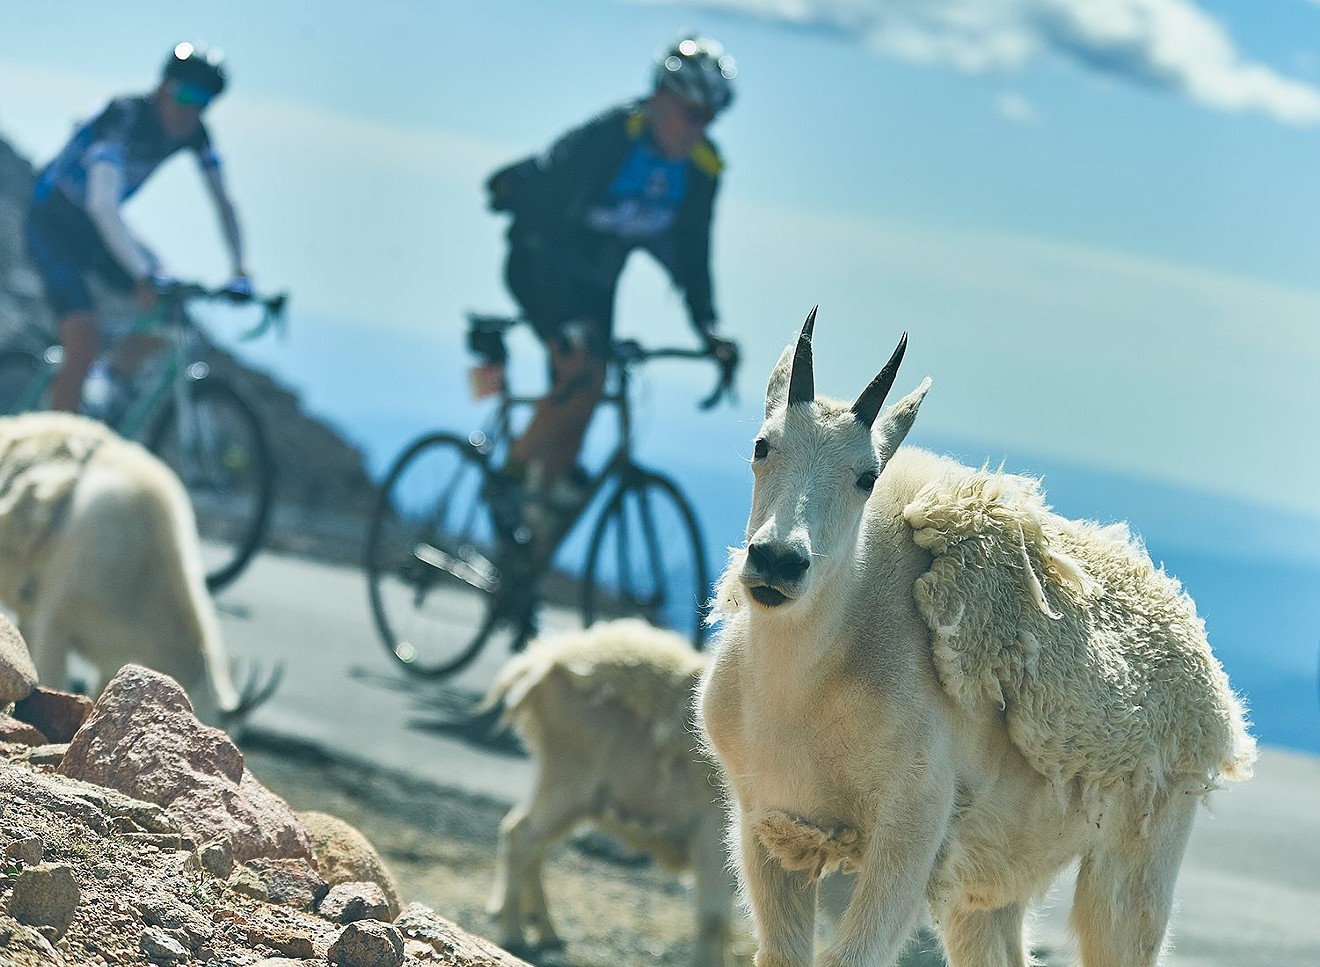 Mountain Goats are a common sight along the highway leading to the top of Mt. Evans.